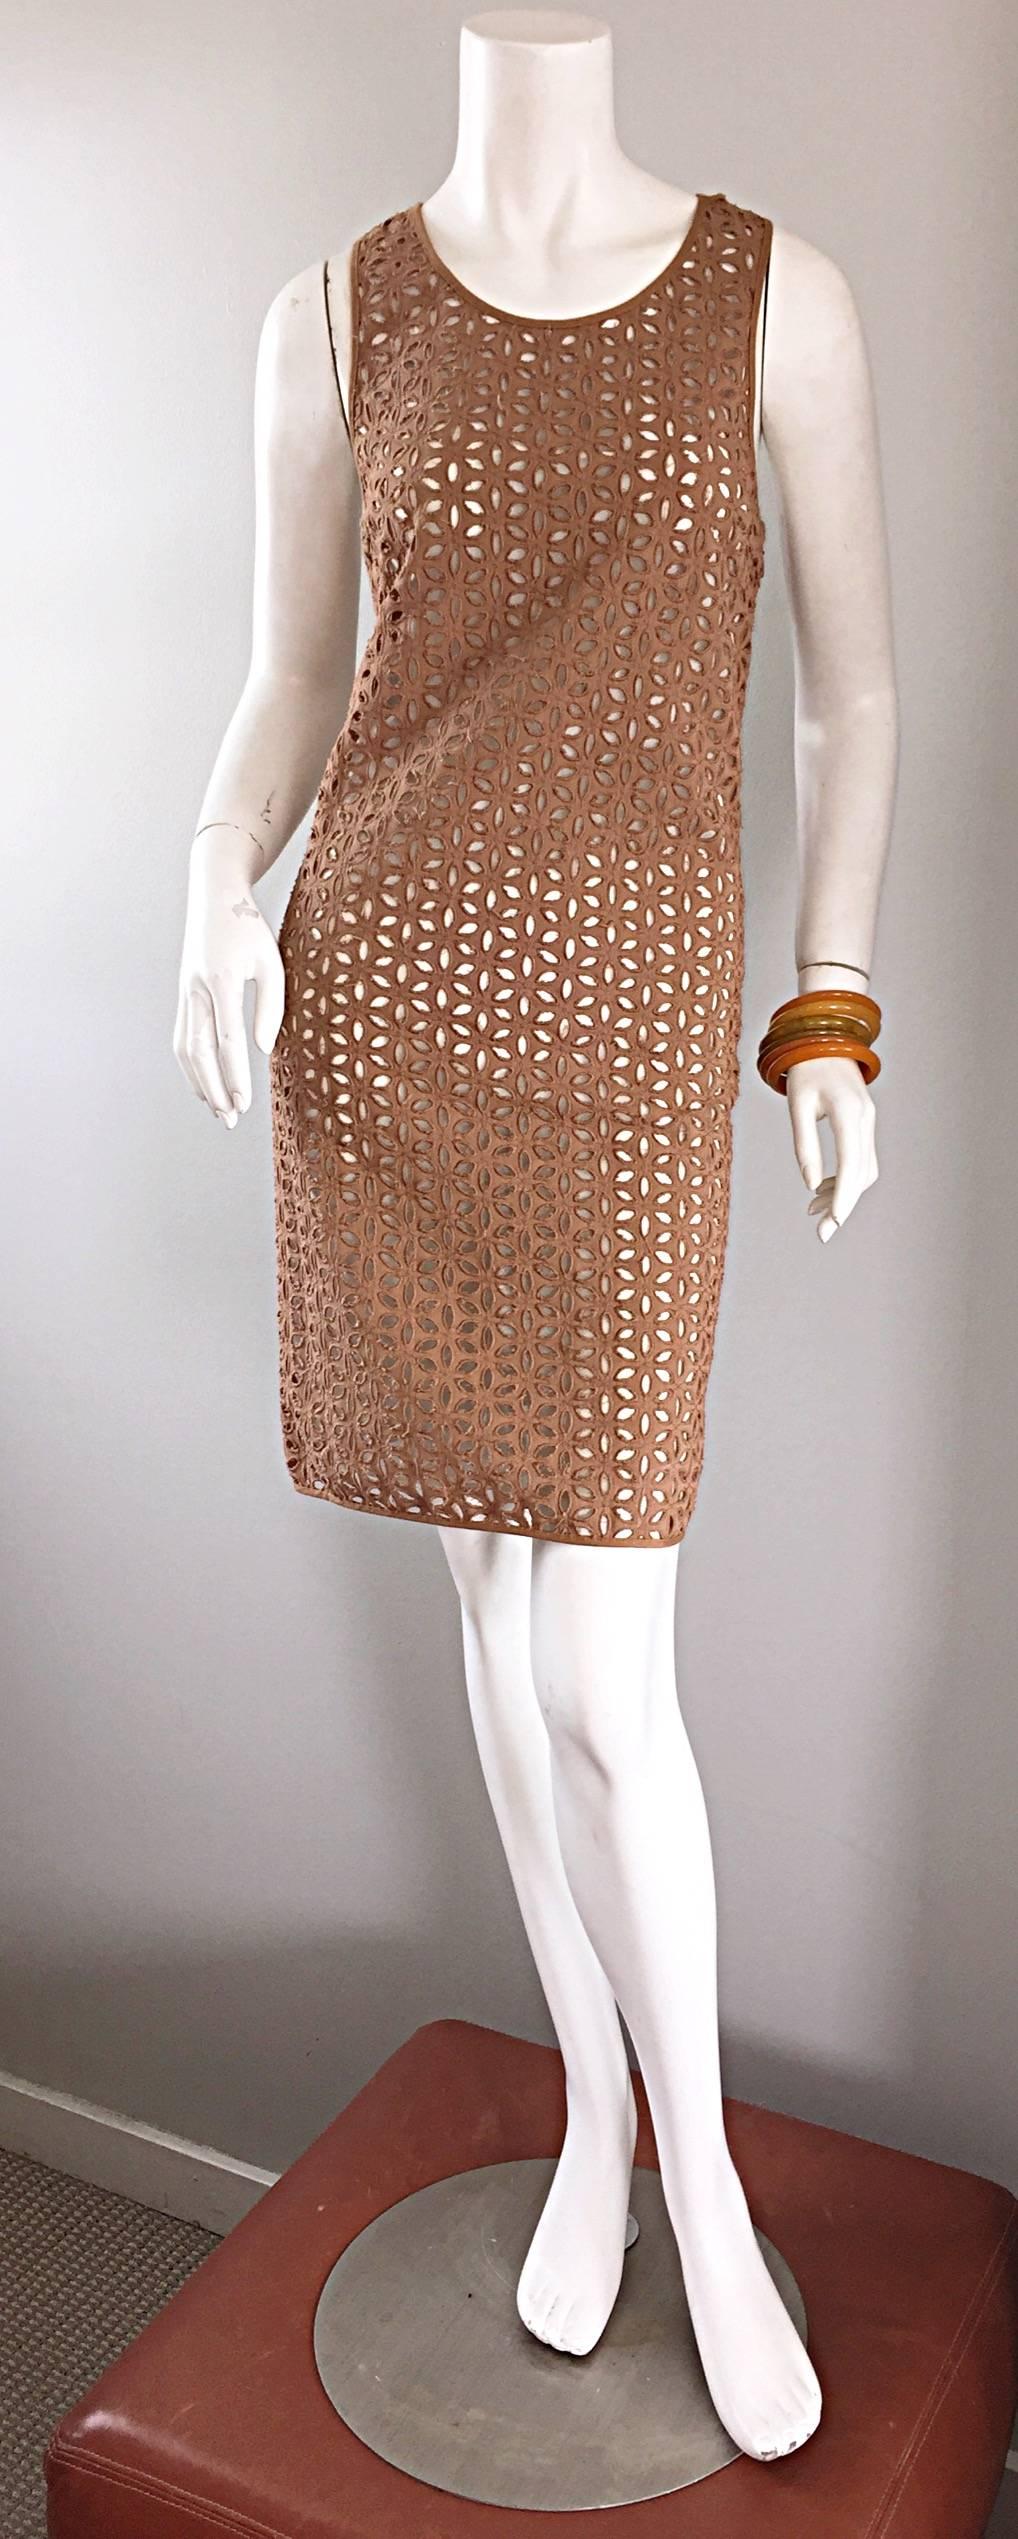 Chic brand new DEREK LAM taupe / light brown crochet cut-out dress with separate matching ivory spaghetti strap slip. Hidden zipper up the side with hook-and-eye closure. Great shift fit that hugs the body in all the right places, whilst remaining